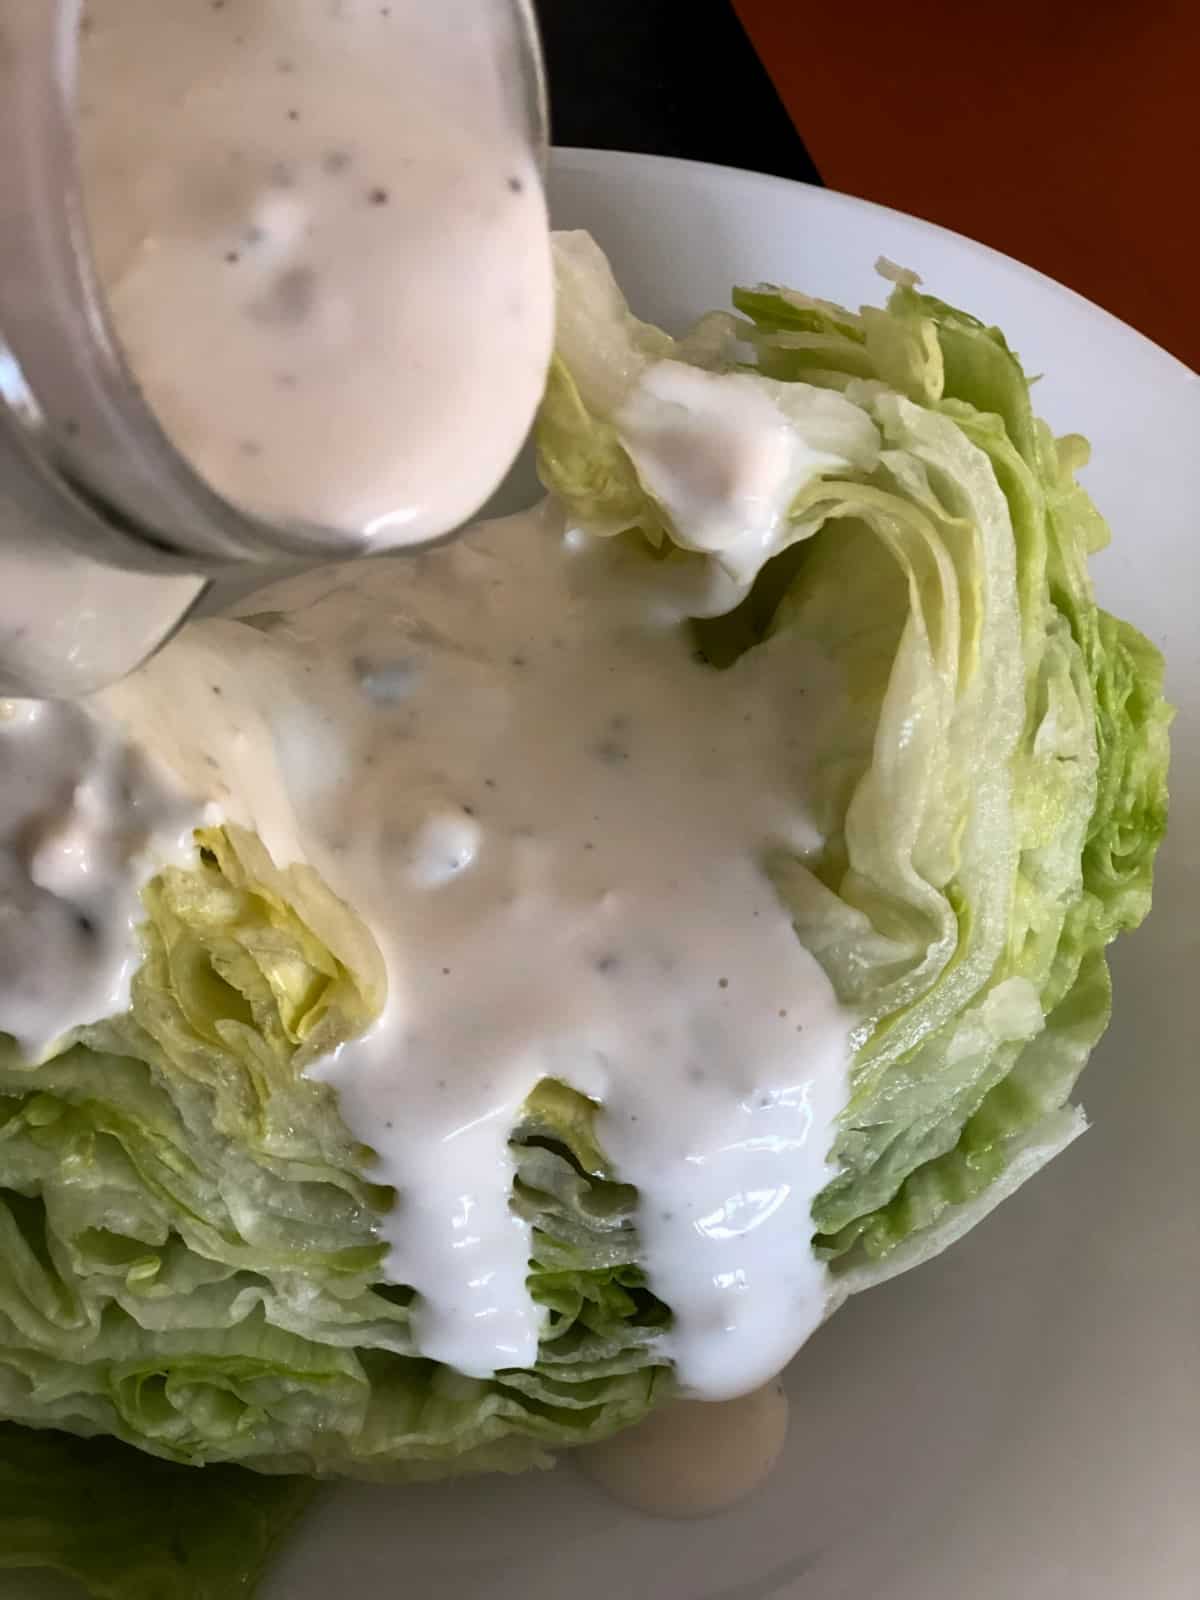 Pouring blue cheese dressing over wedge of iceberg lettuce.